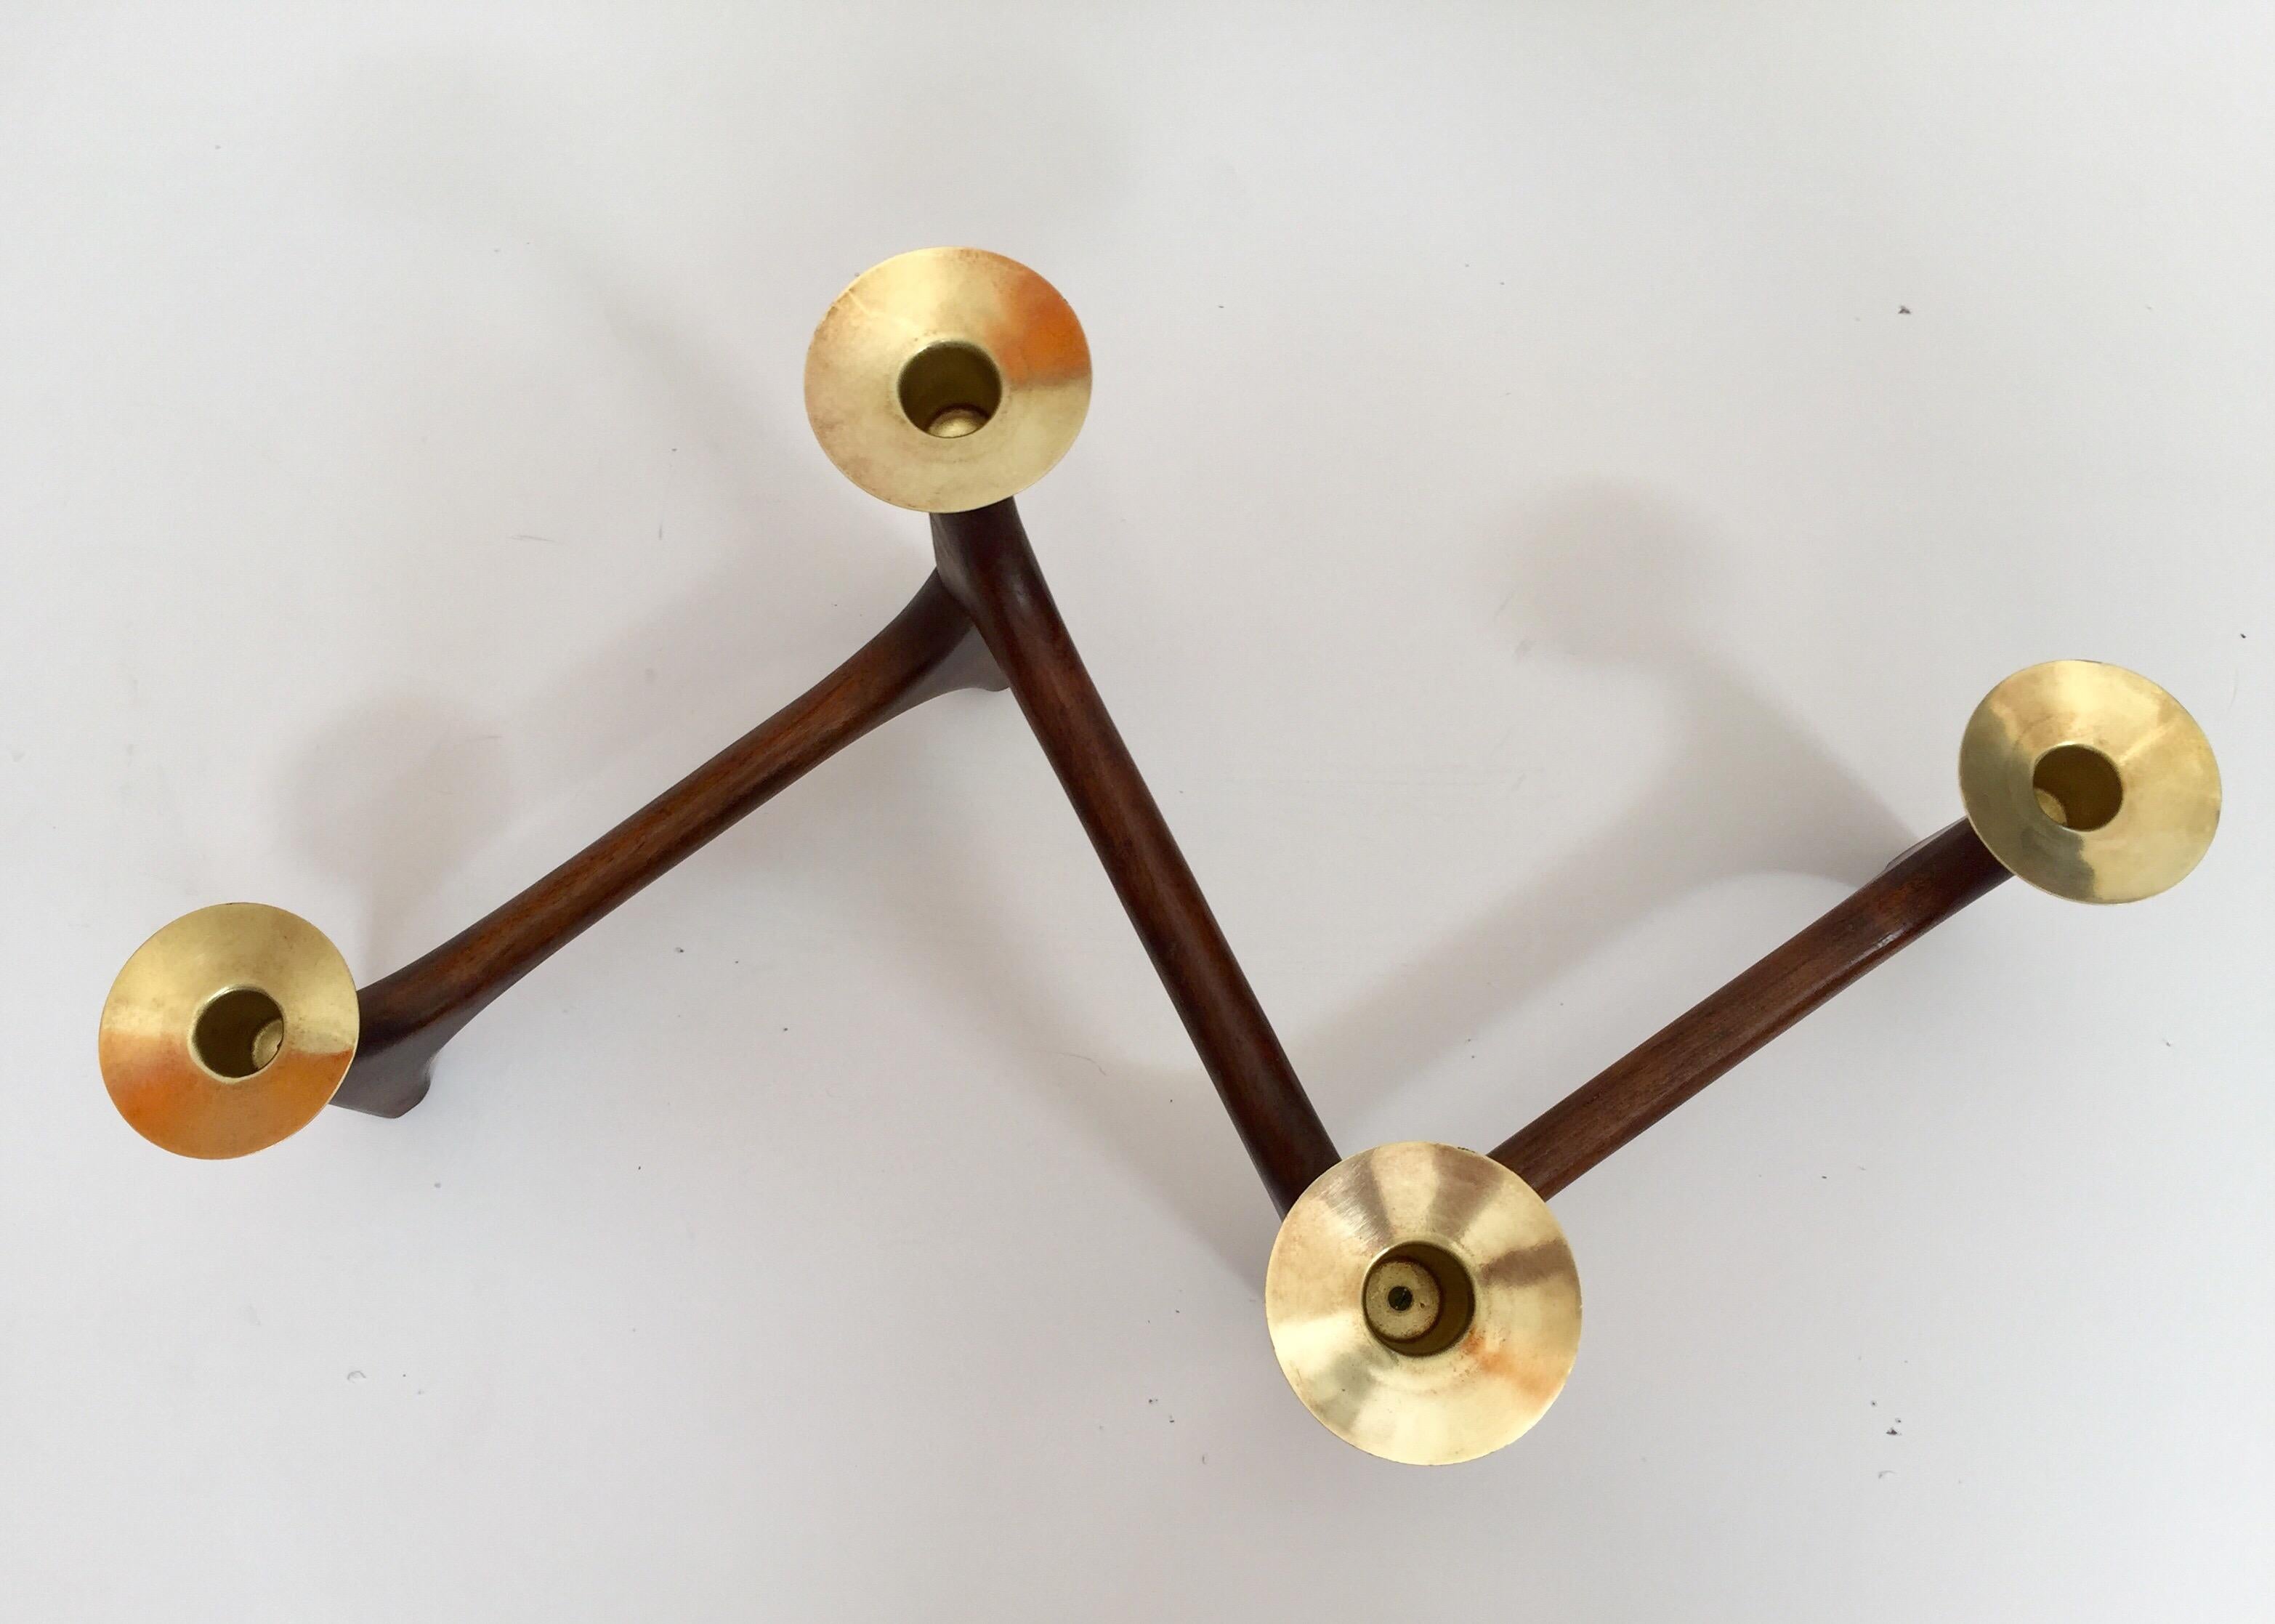 Vintage 1960s modernist candle holder, teak and polished brass articulating candlestick.
Mid-Century Modern handcrafted modern teak wood and brass candlestick centerpiece.
This stained wooden candle holder features a folding frame with four brass